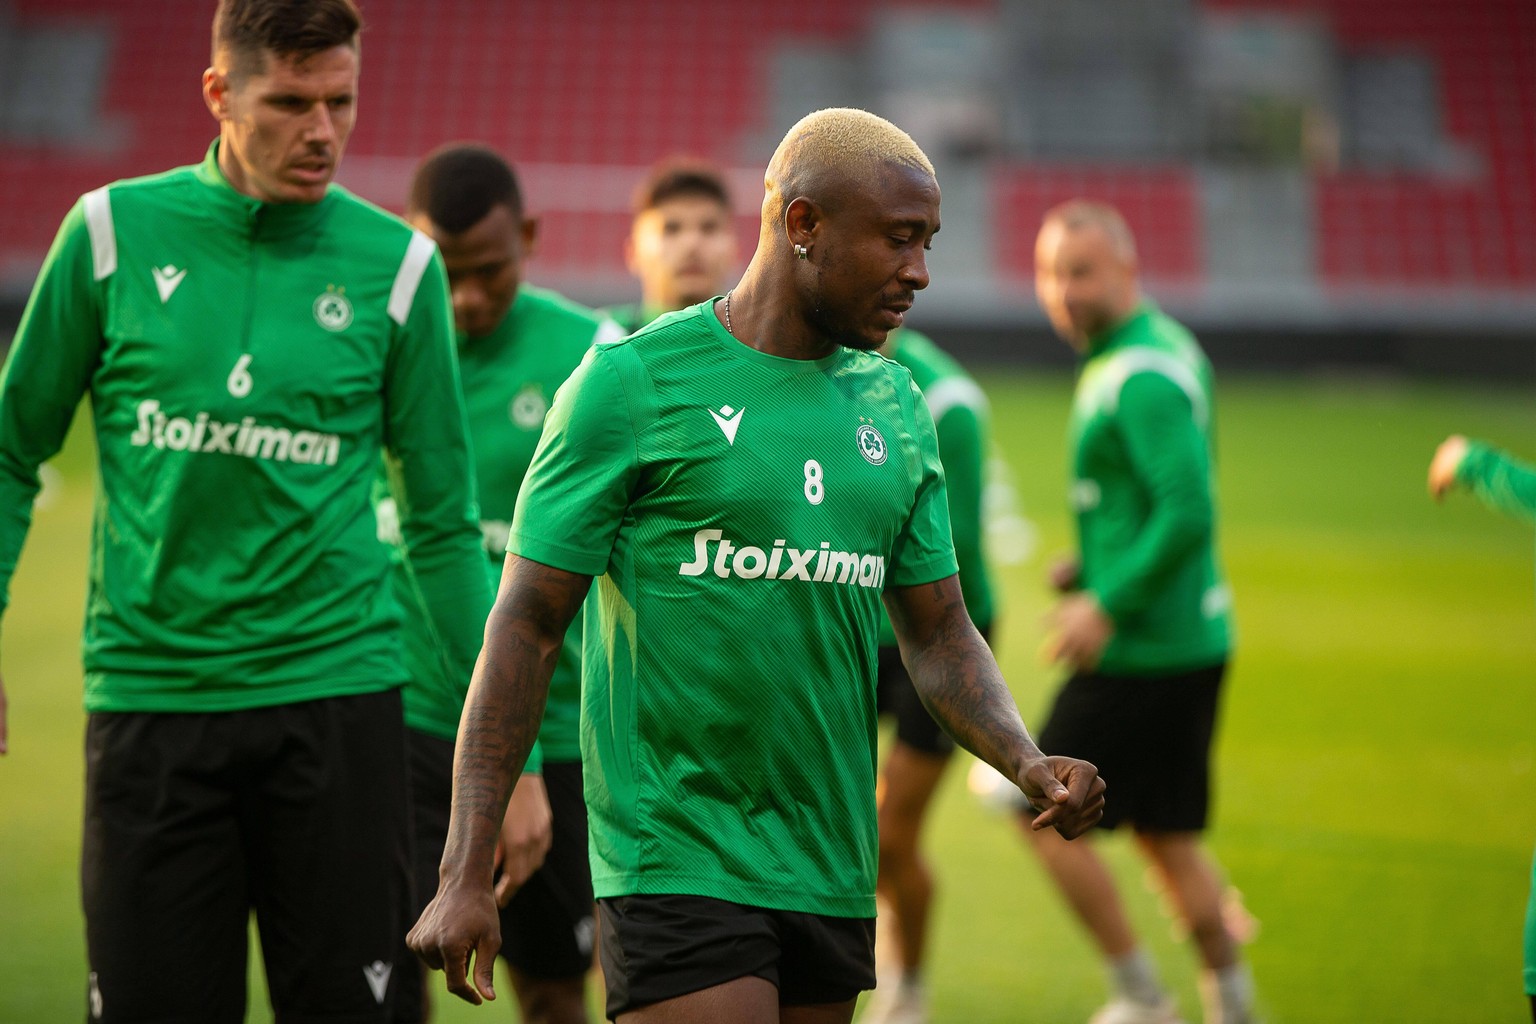 Omonoia s Iyayi Atiemwen pictured during a training session of Cyprus club Omonia Nicosia, in Antwerp, Wednesday 25 August 2021. On Thursday nicosia will play in the return leg of the play-off for the ...